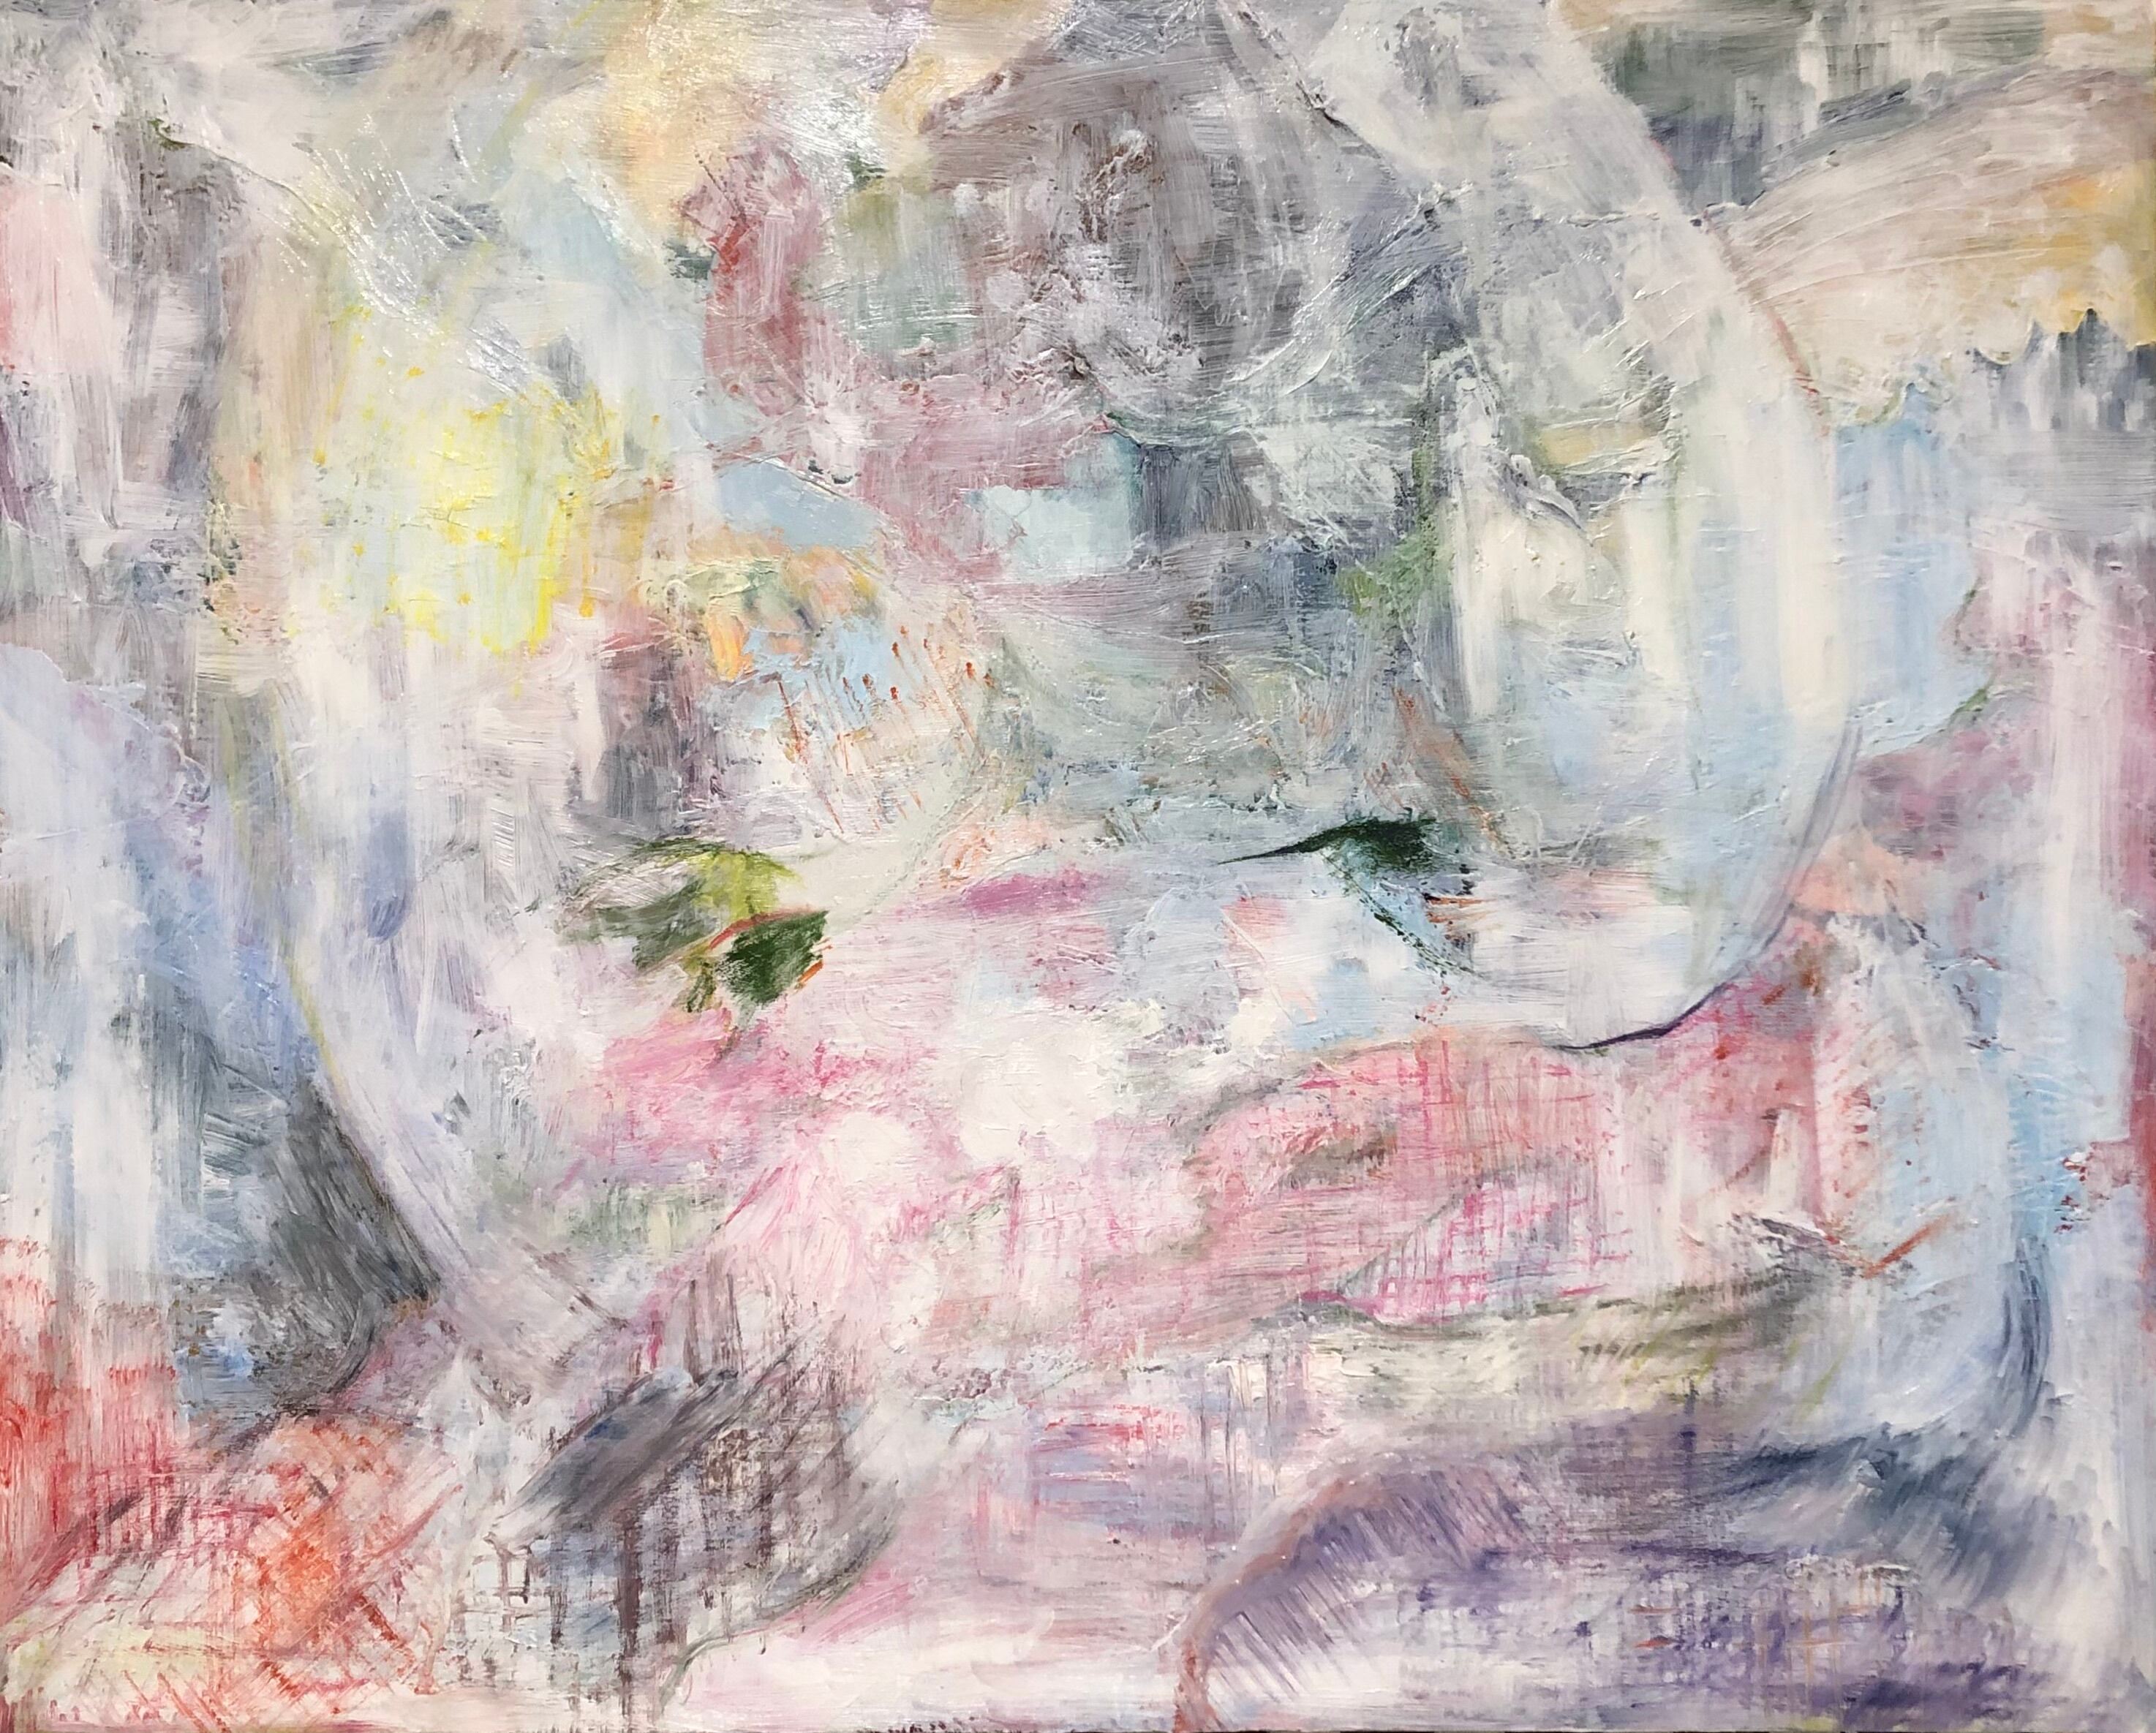 i care #01 油絵 painting 絵画 abstract apovelprime.com.br